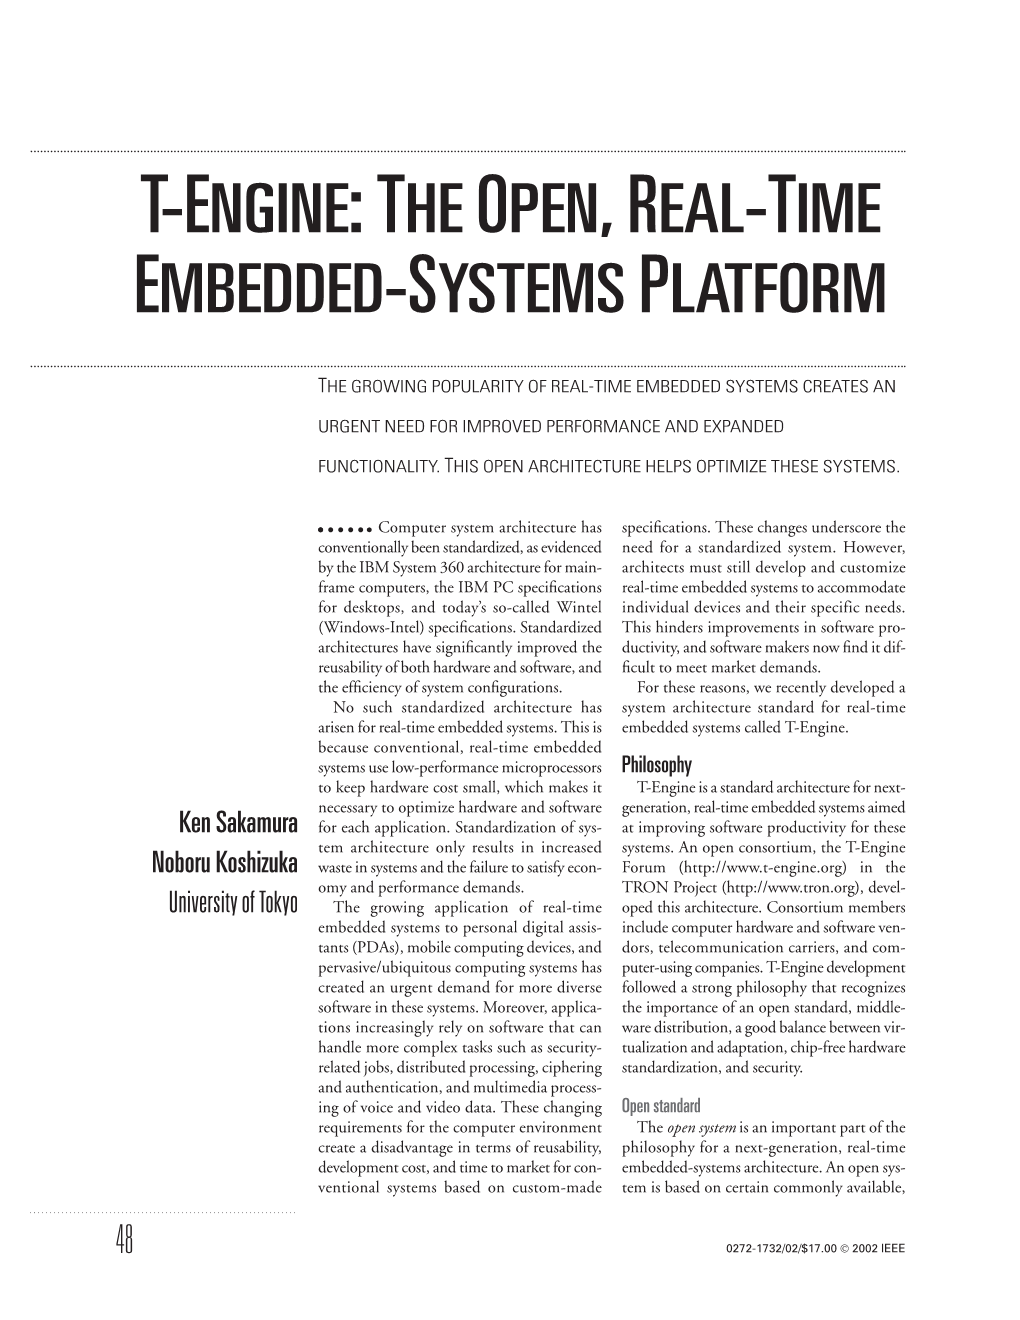 T-Engine: the Open, Real-Time Embedded-Systems Platform